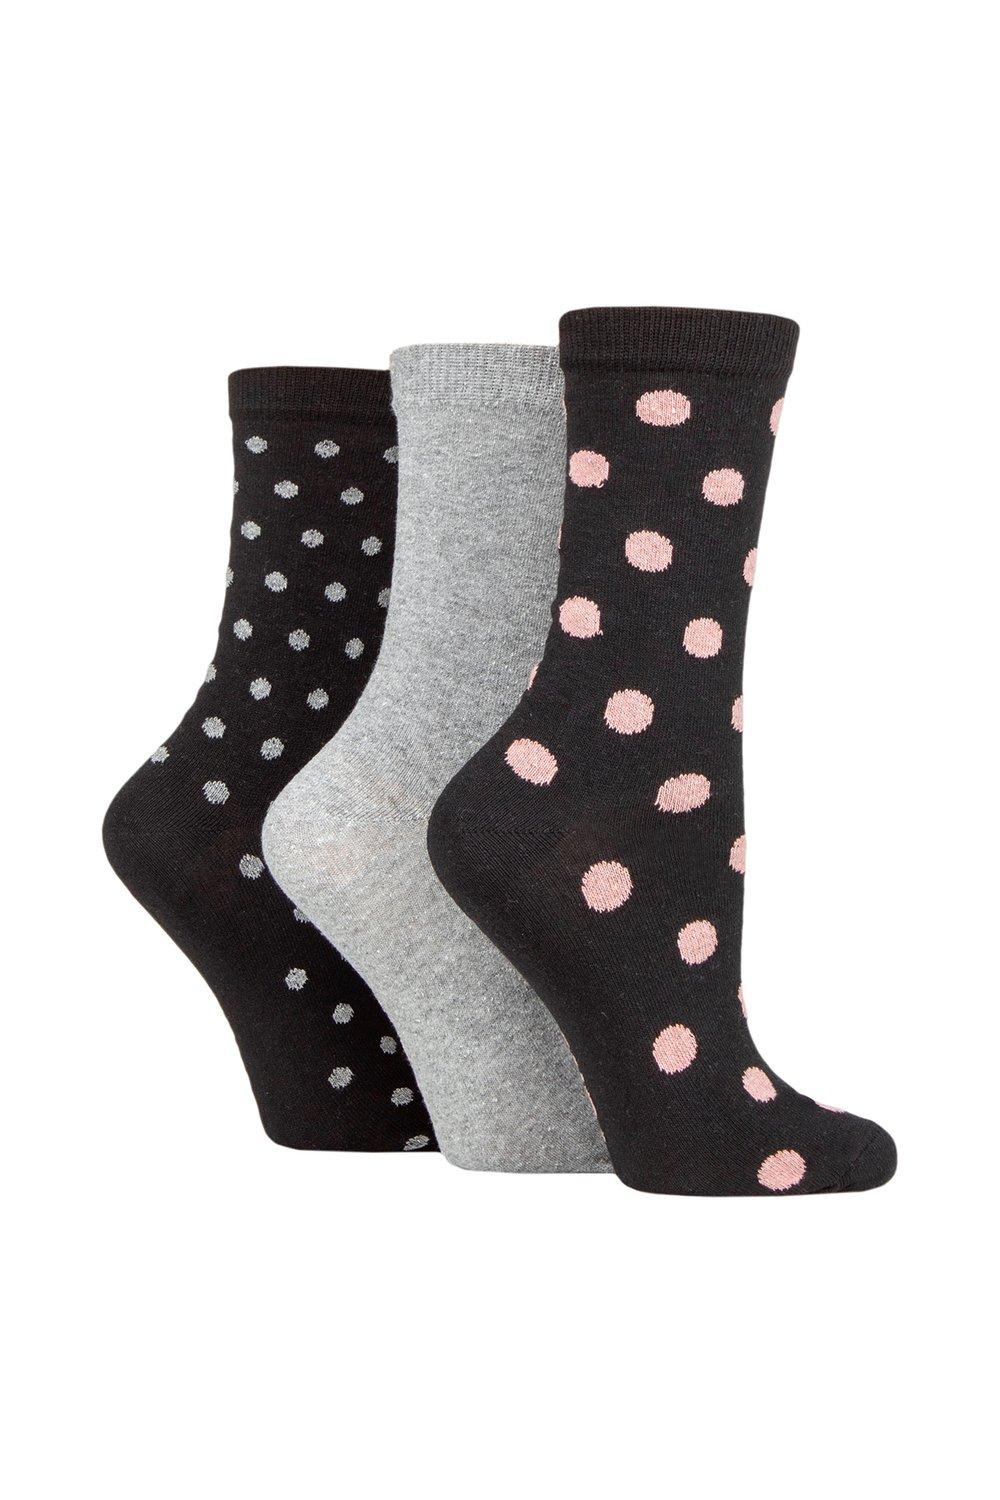 3 Pair 100% Recycled Spots Cotton Socks